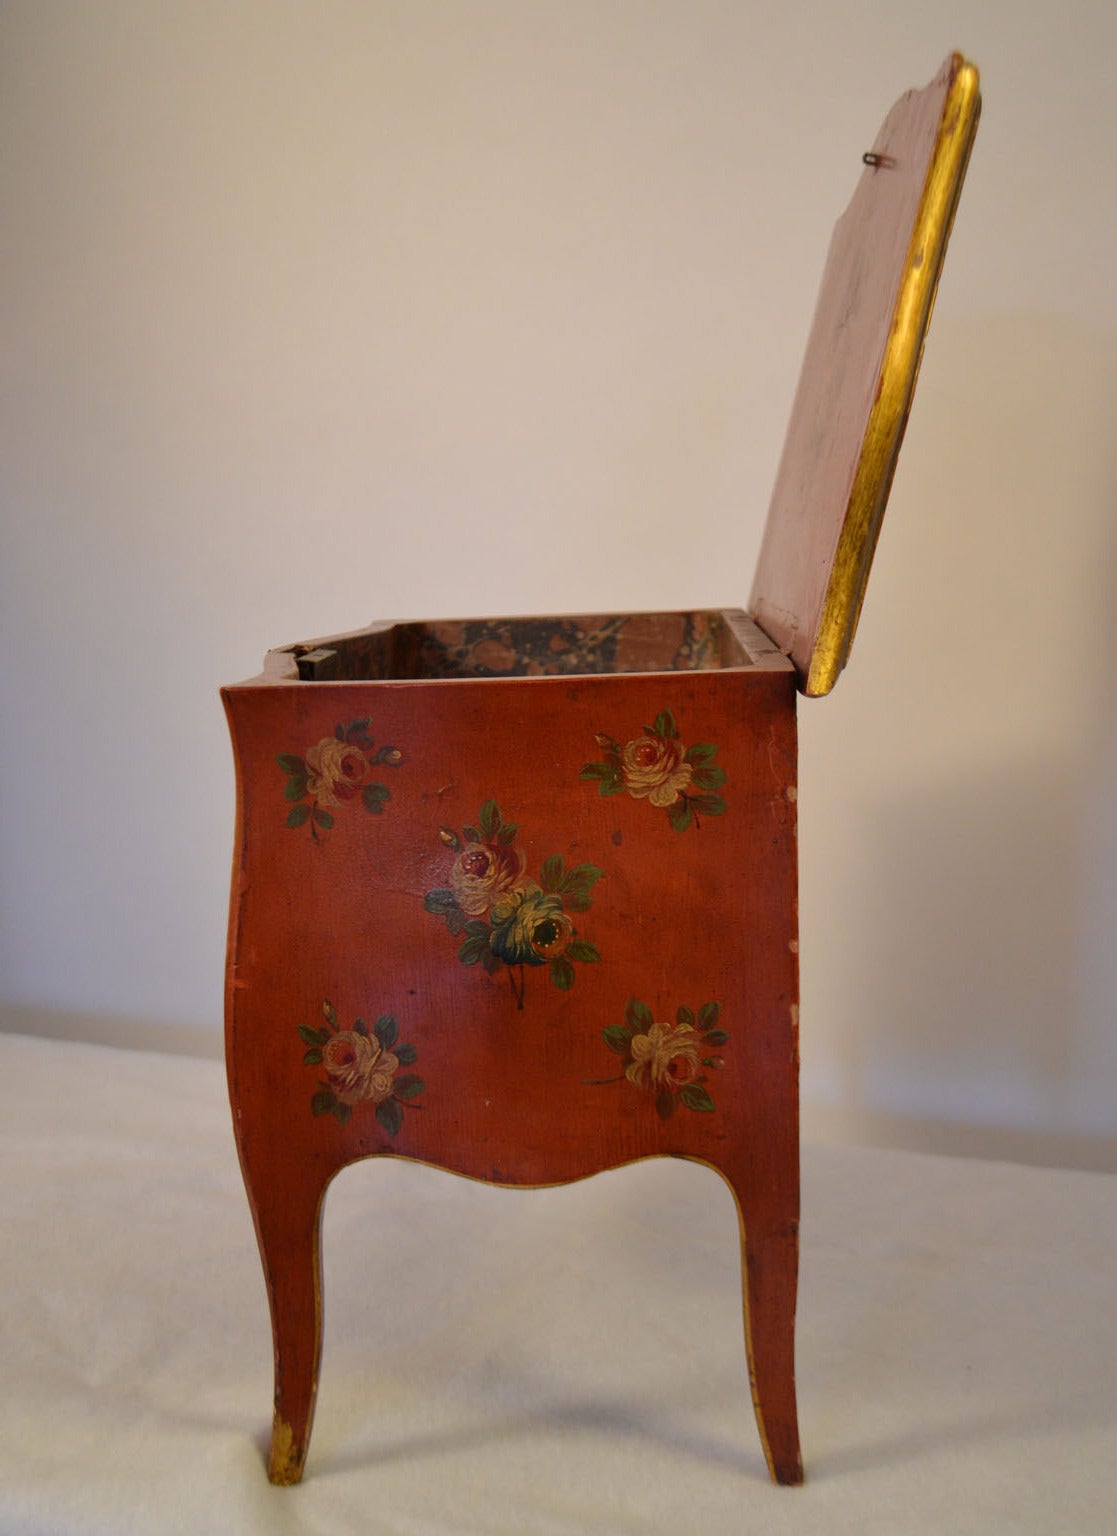 20th Century Turn-of-the-century Small Painted Commode, Apprentice Piece